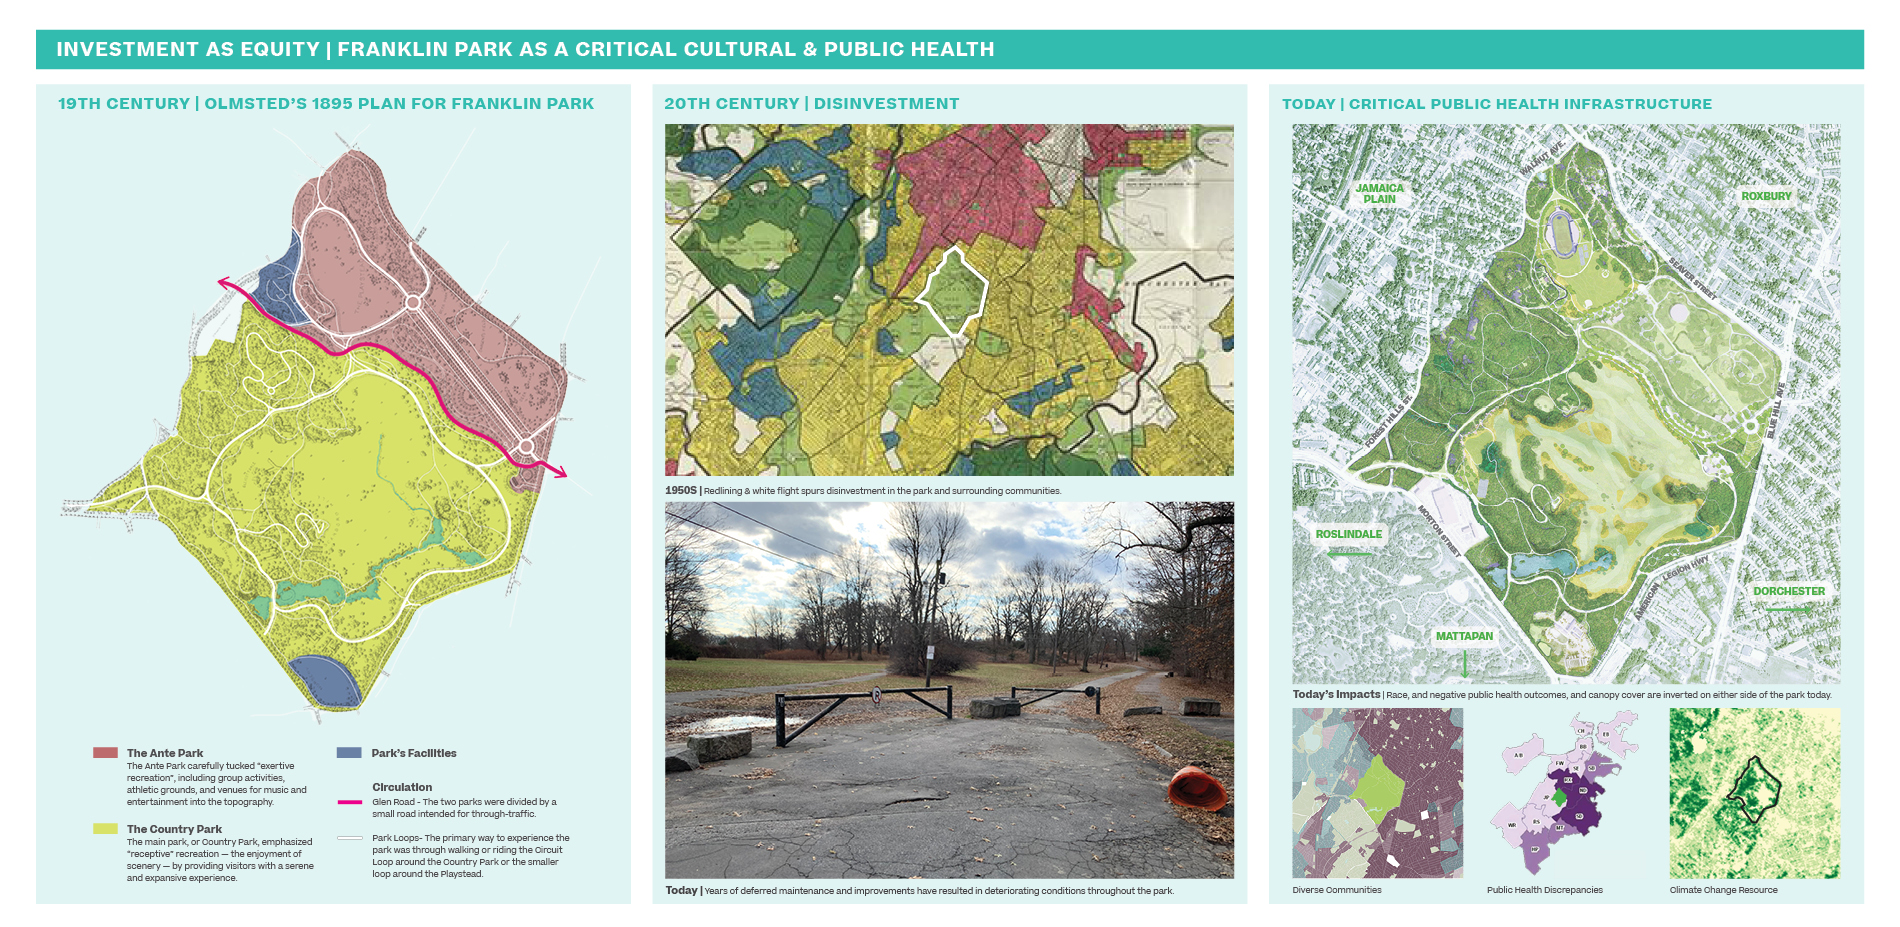 Investment as Equity: Franklin Park as a Critical Cultural & Public Health Resource